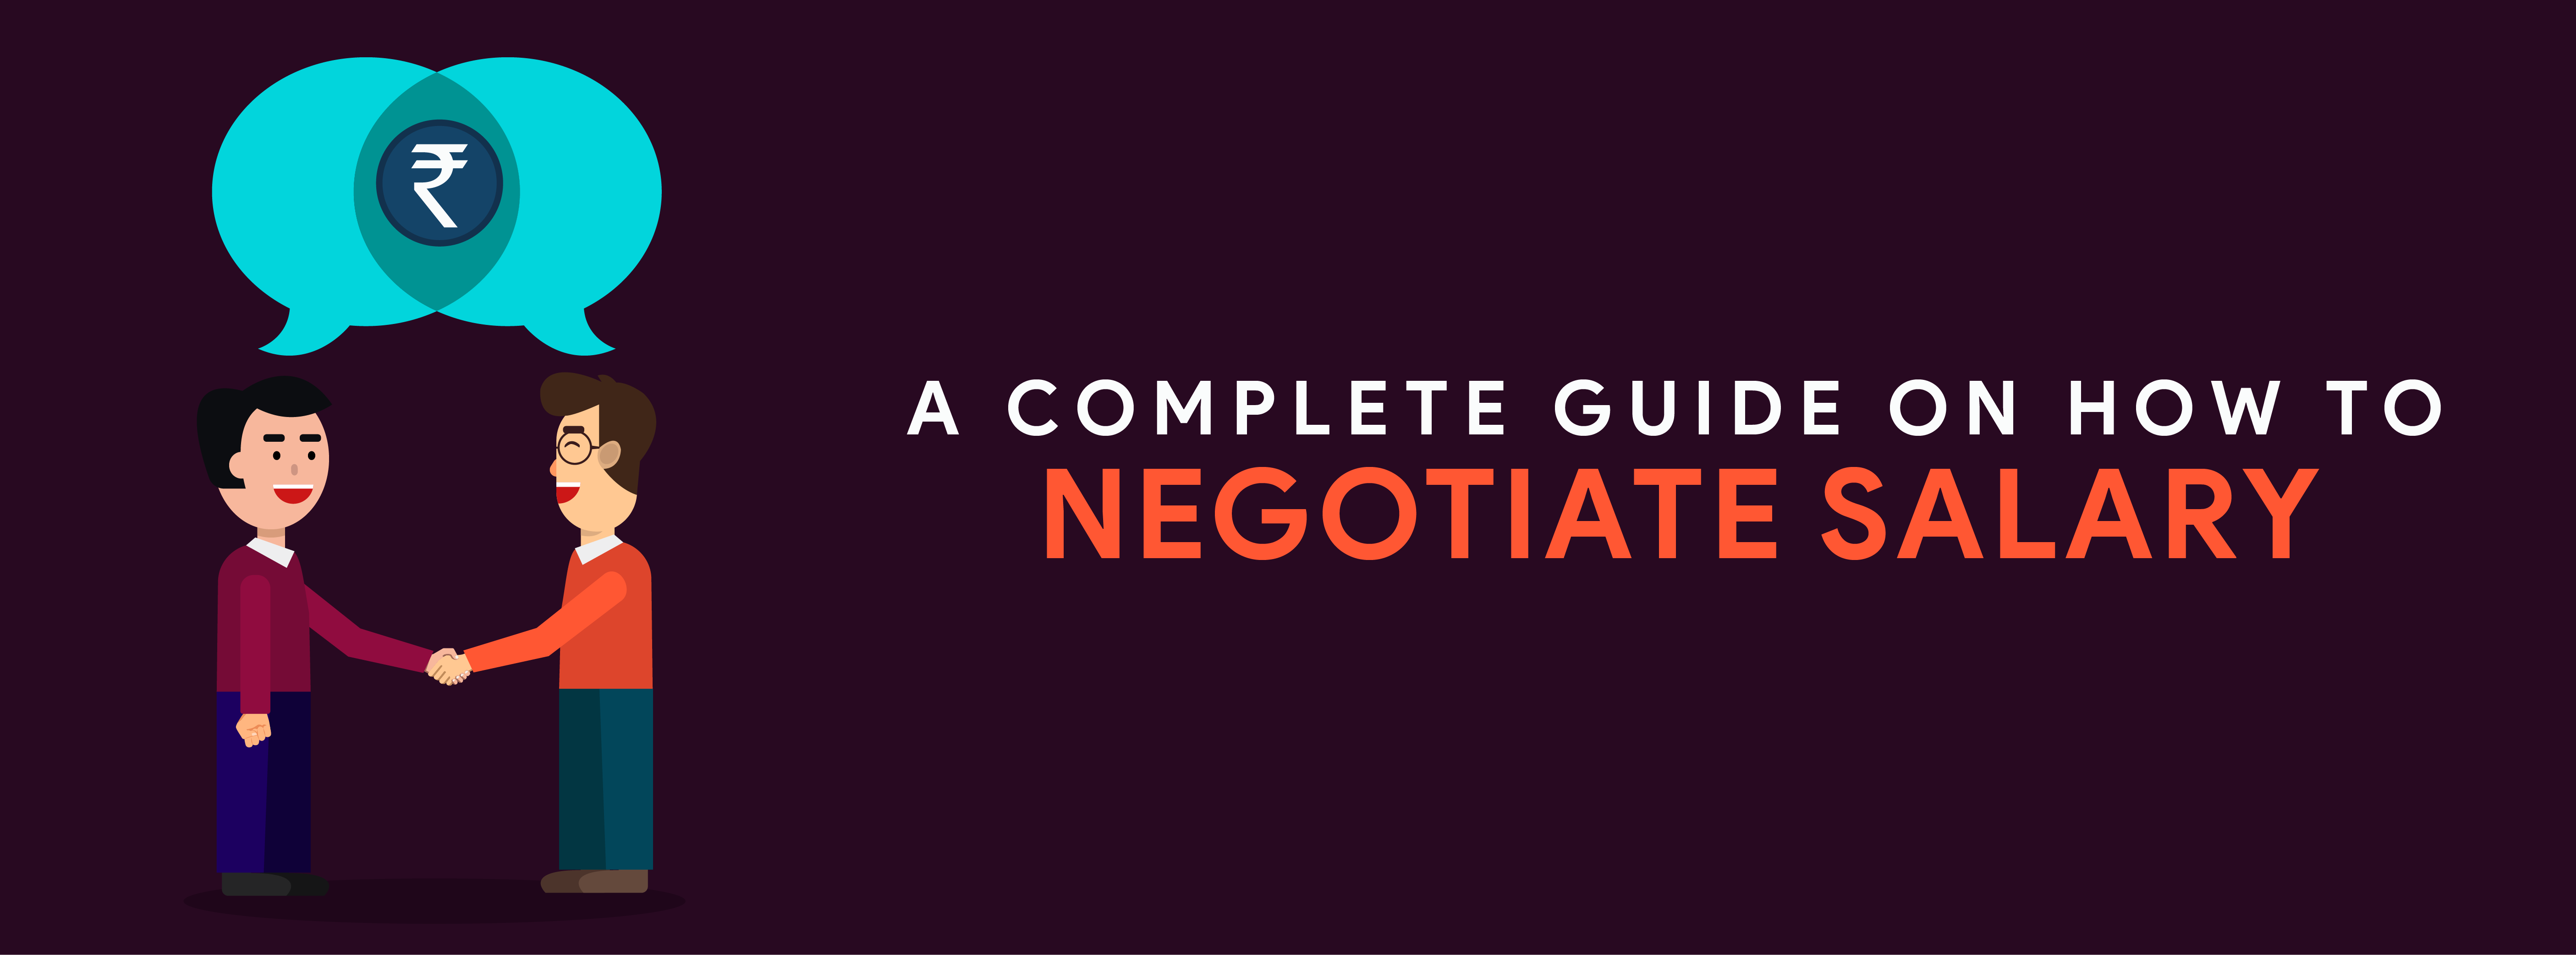 A complete guide on how to negotiate salary